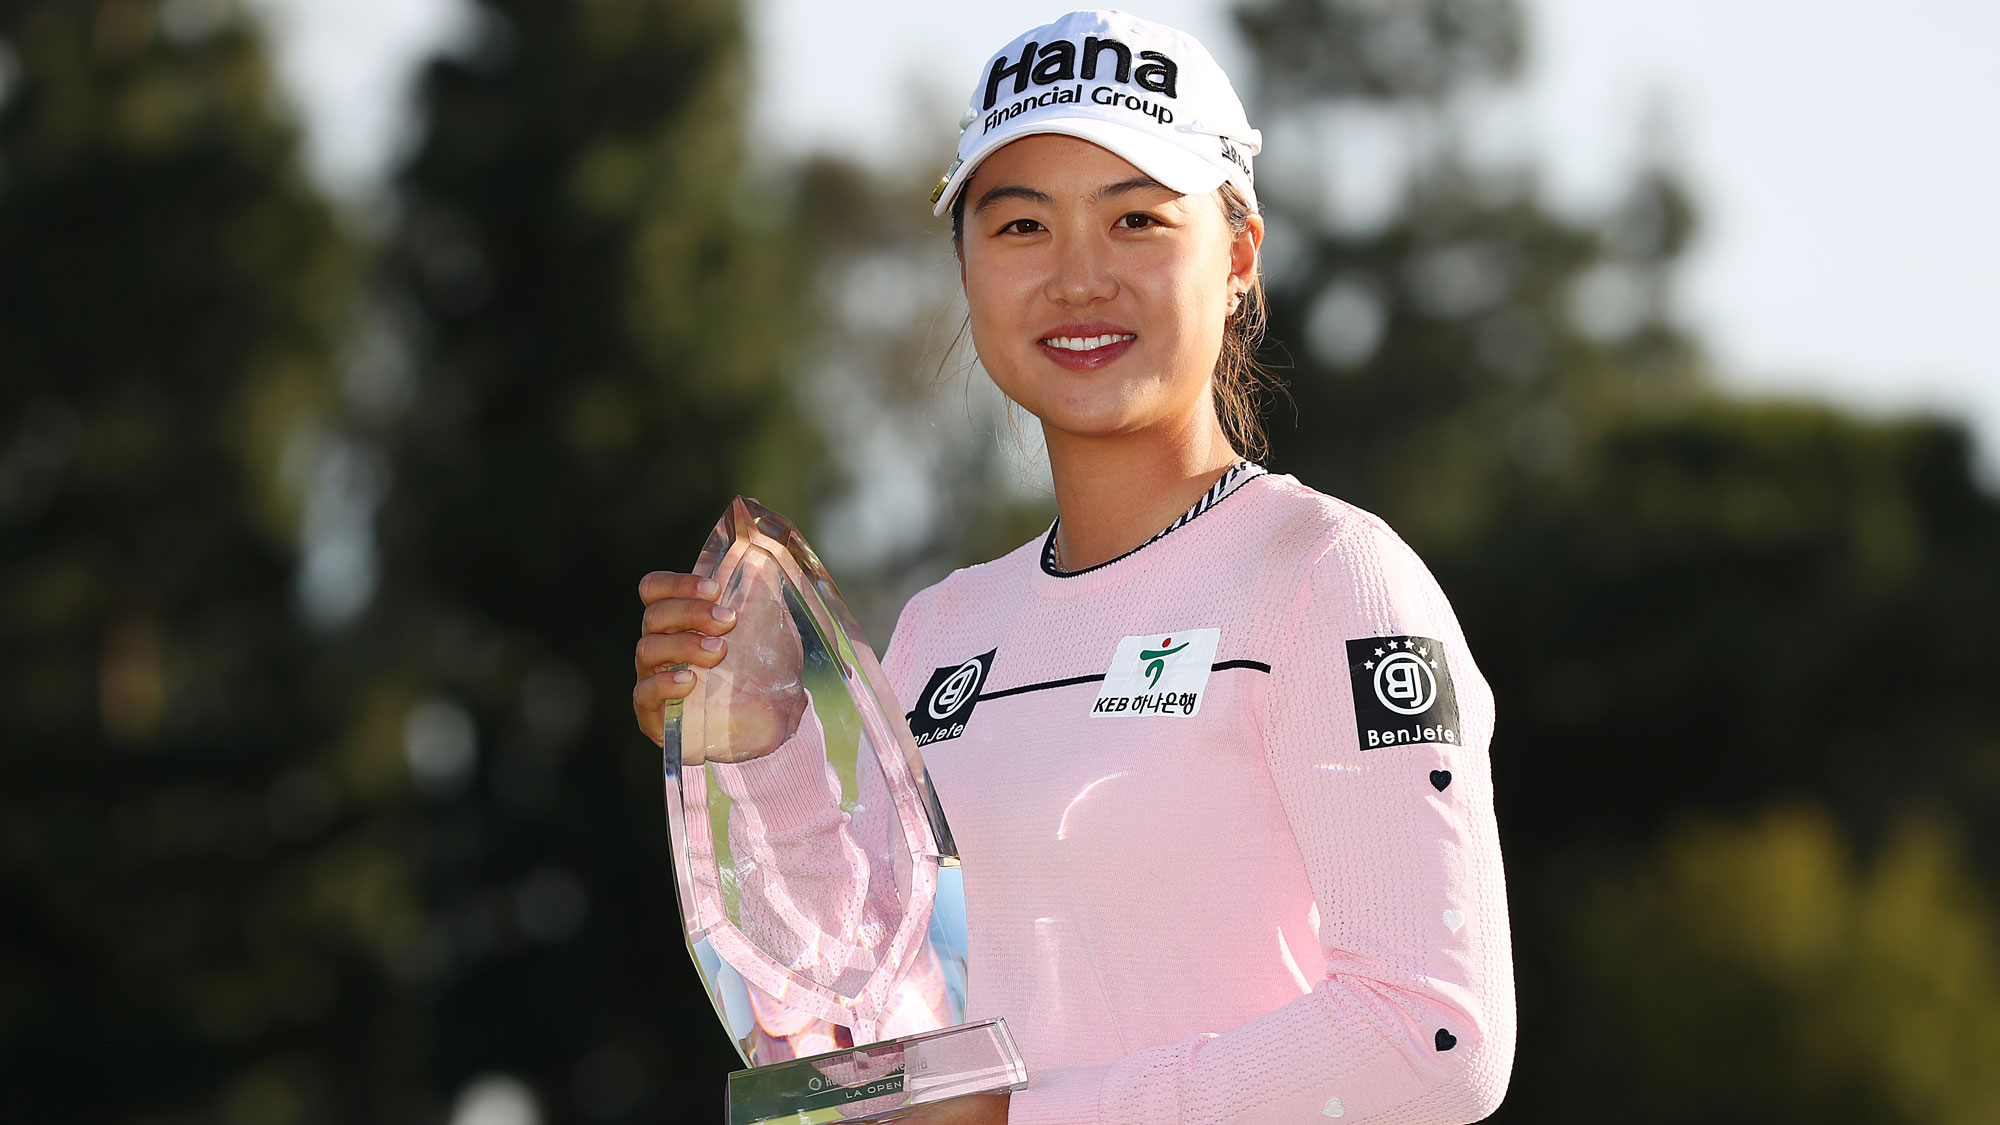 Minjee Lee has her #BagsPacked for the 2020 Diamond Resorts Tournament of Champions after her victory at the 2019 HUGEL-AIR PREMIA LA Open